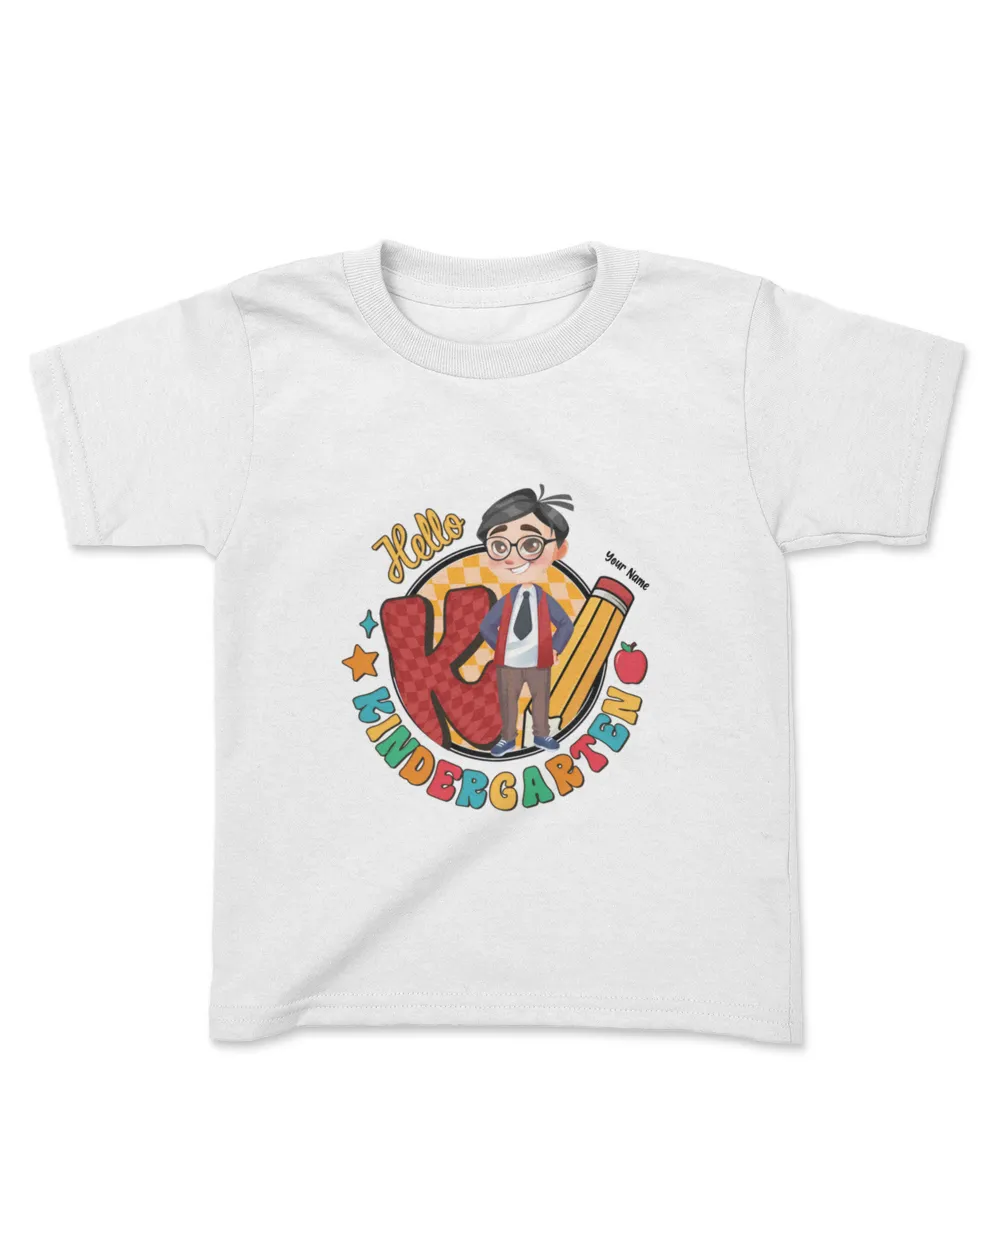 Personalized T-shirt For Kid - Hello School - Personalized Gift For Kid